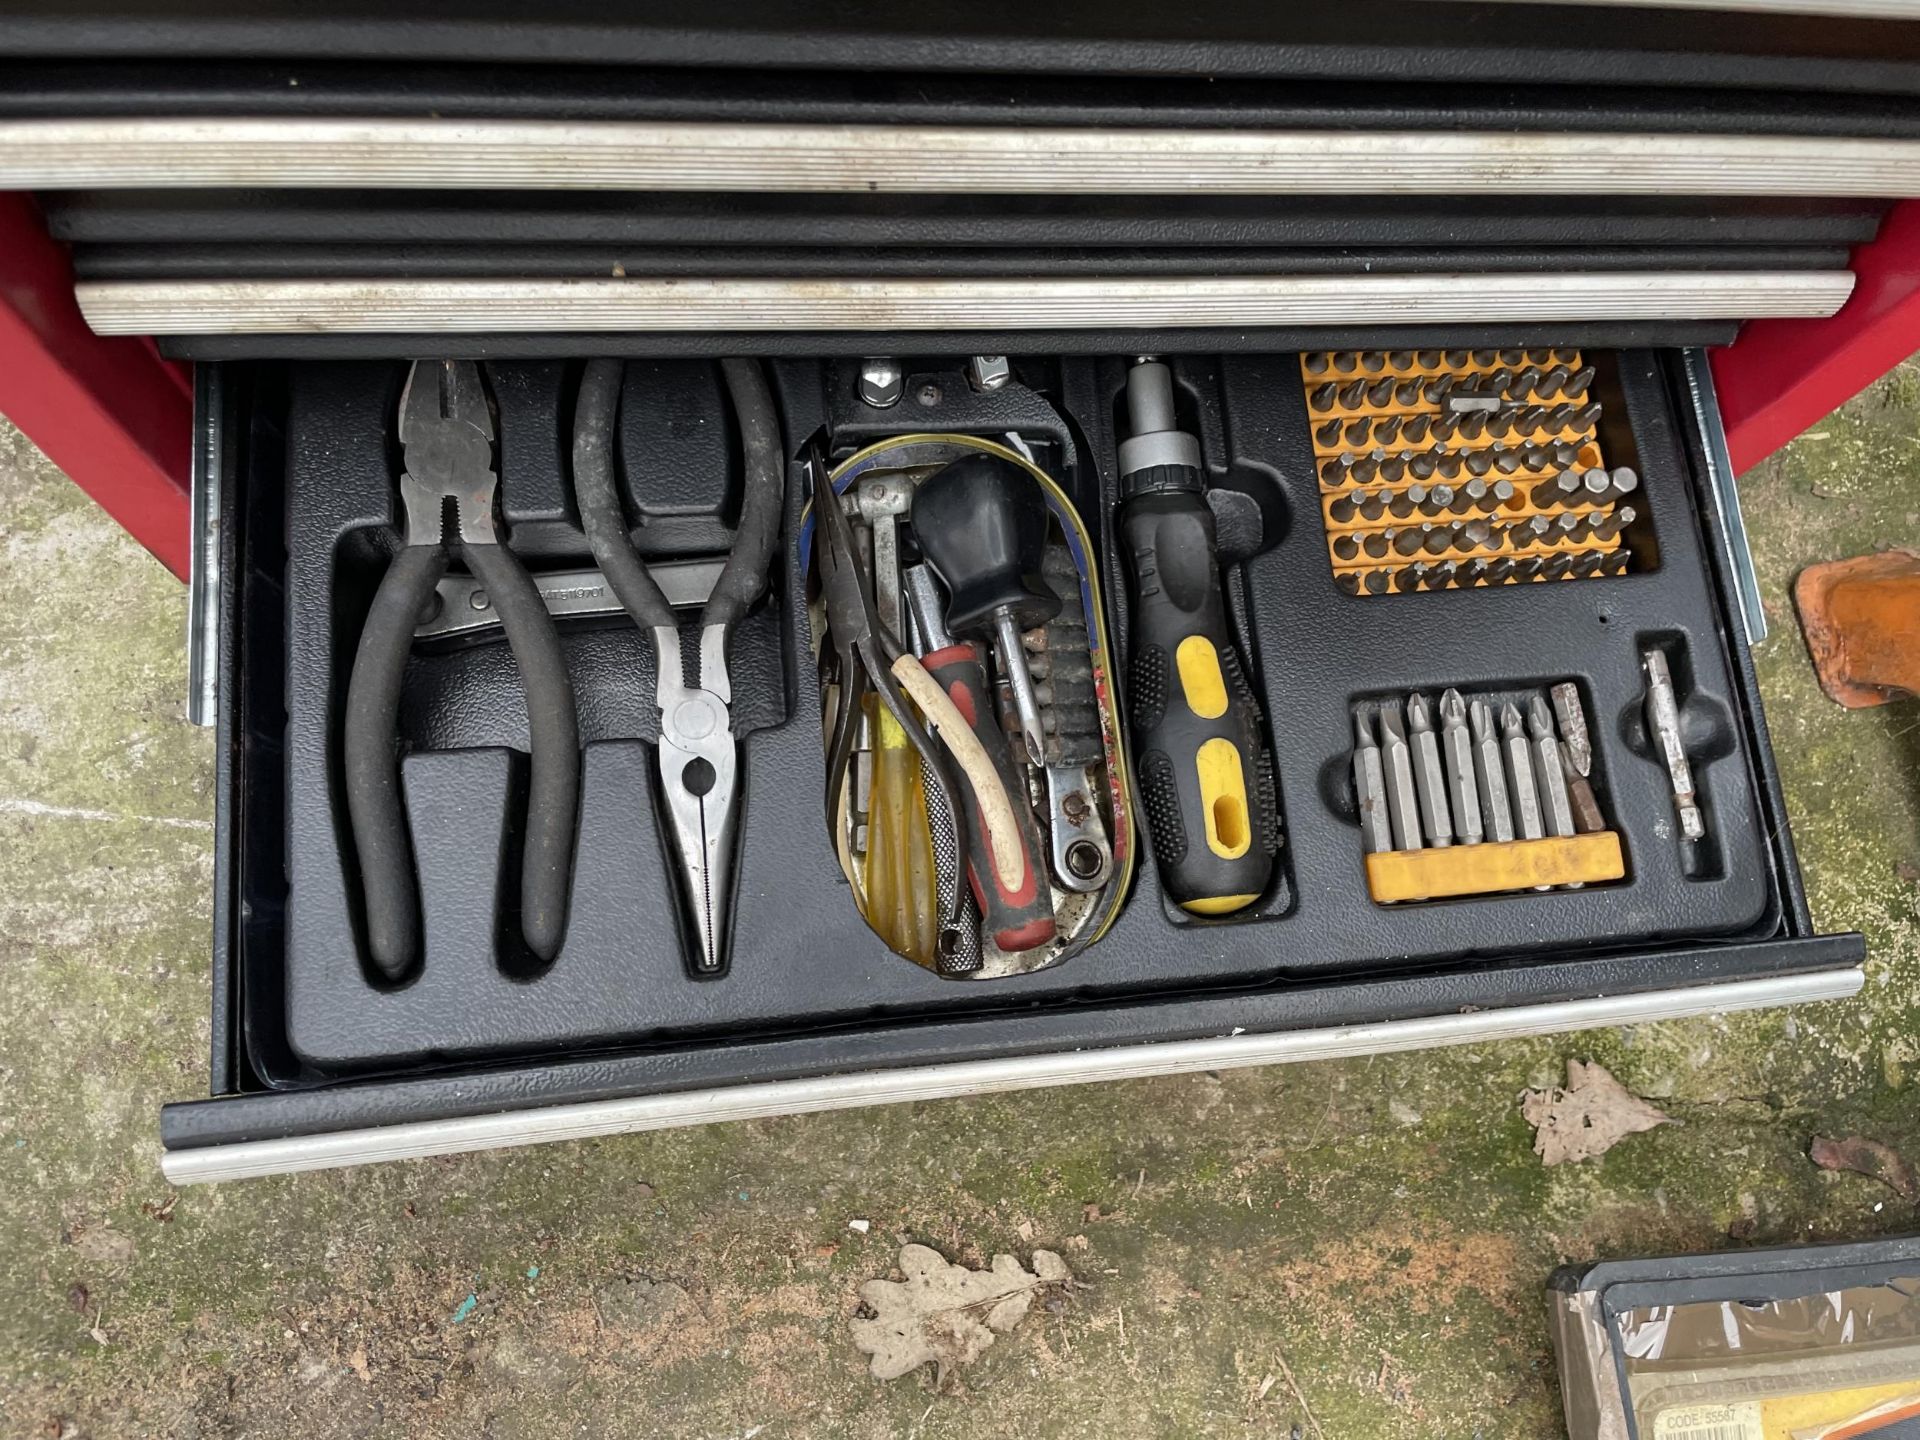 A TOOL CHEST COMPLETE WITH SCREWDRIVERS, HAMMERS, ETC ALONG WITH A SELECTION OF CROWBARS - Image 4 of 4